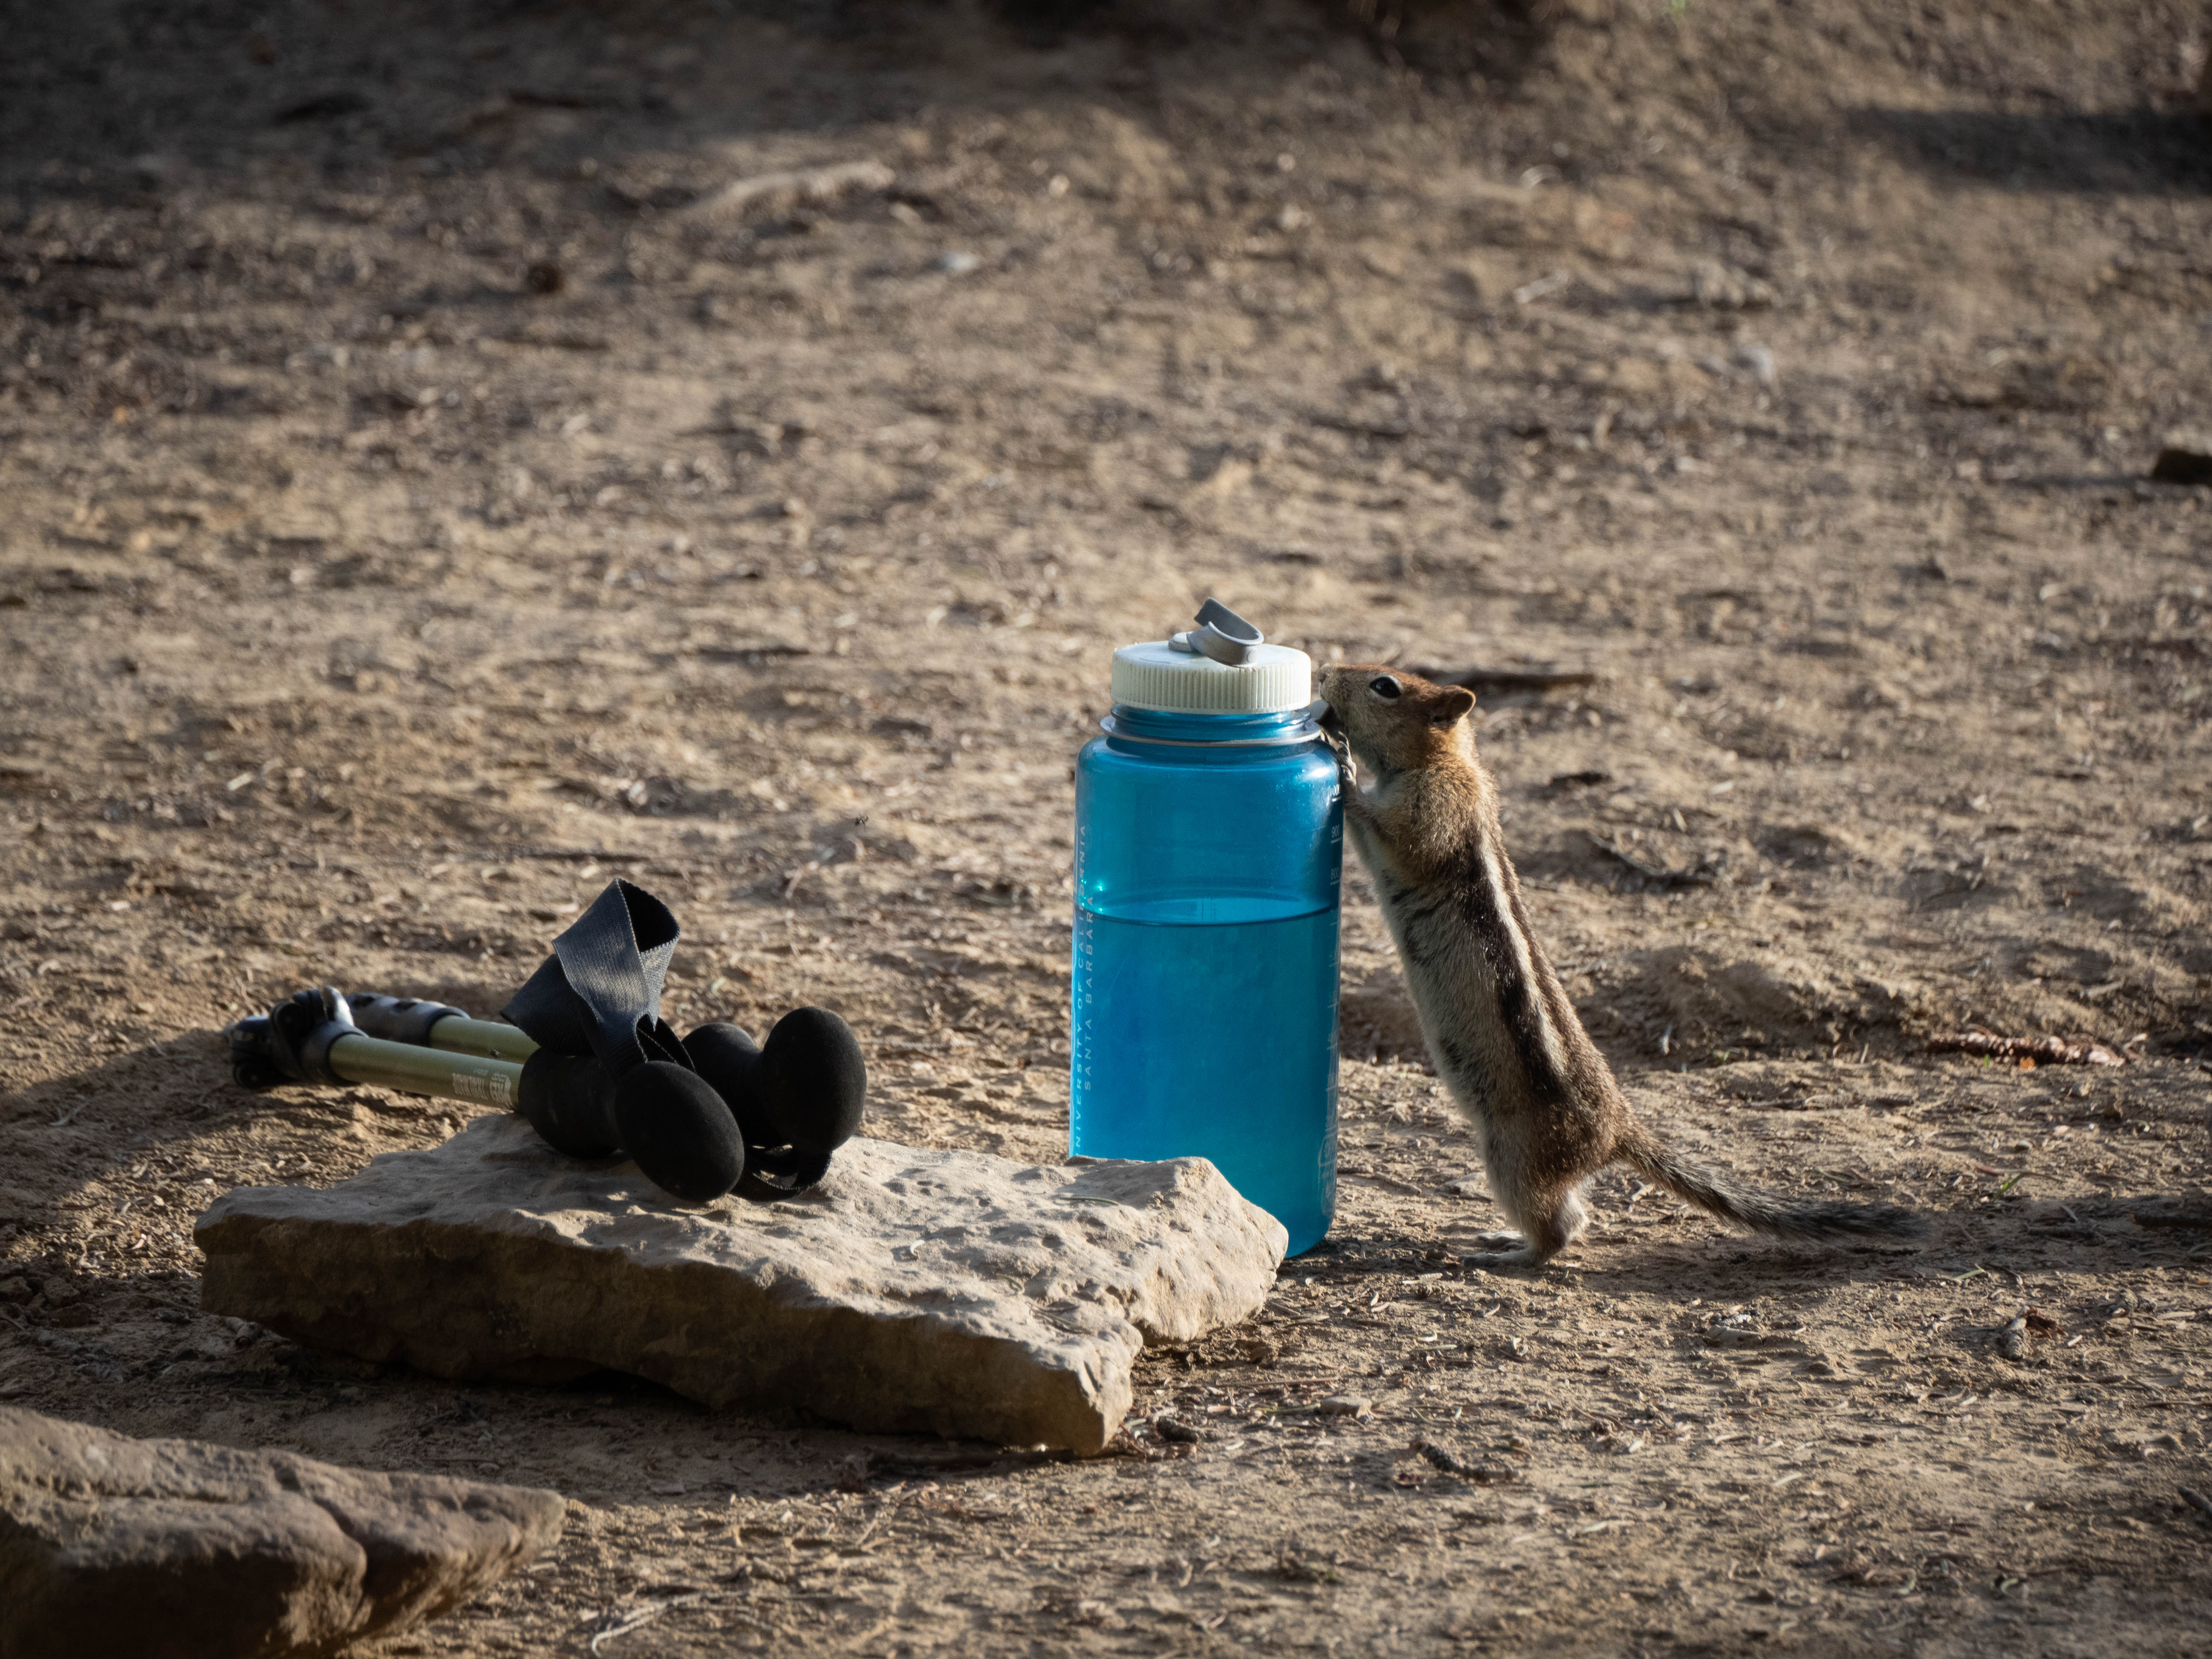 A ground squirrel touching a water bottle